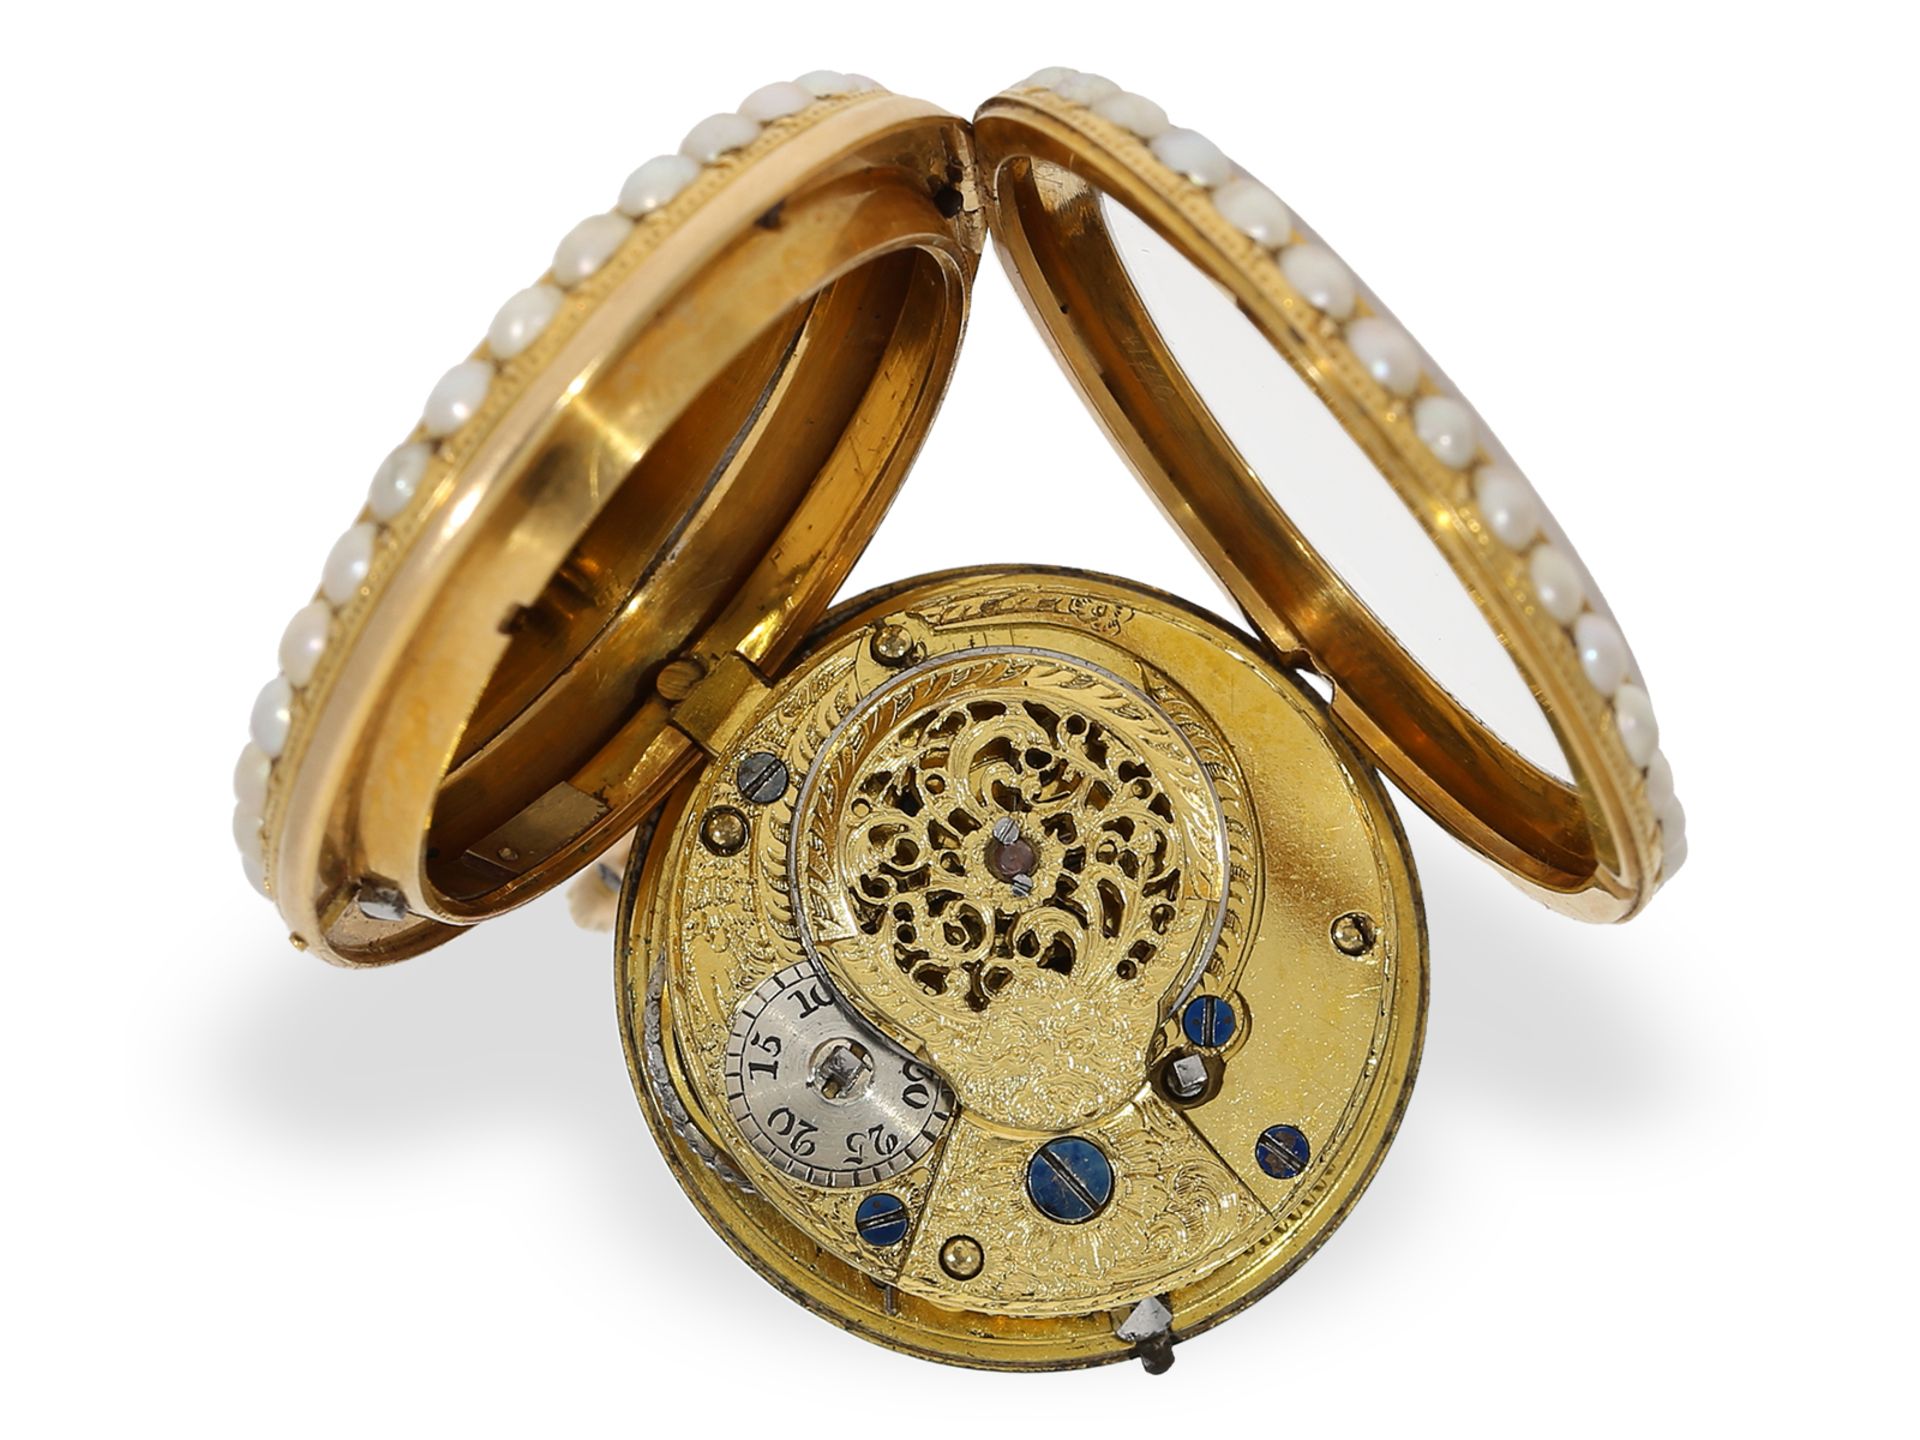 Pocket watch: very fine English gold/enamel verge watch with Oriental pearl setting, ca. 1790 - Image 4 of 5